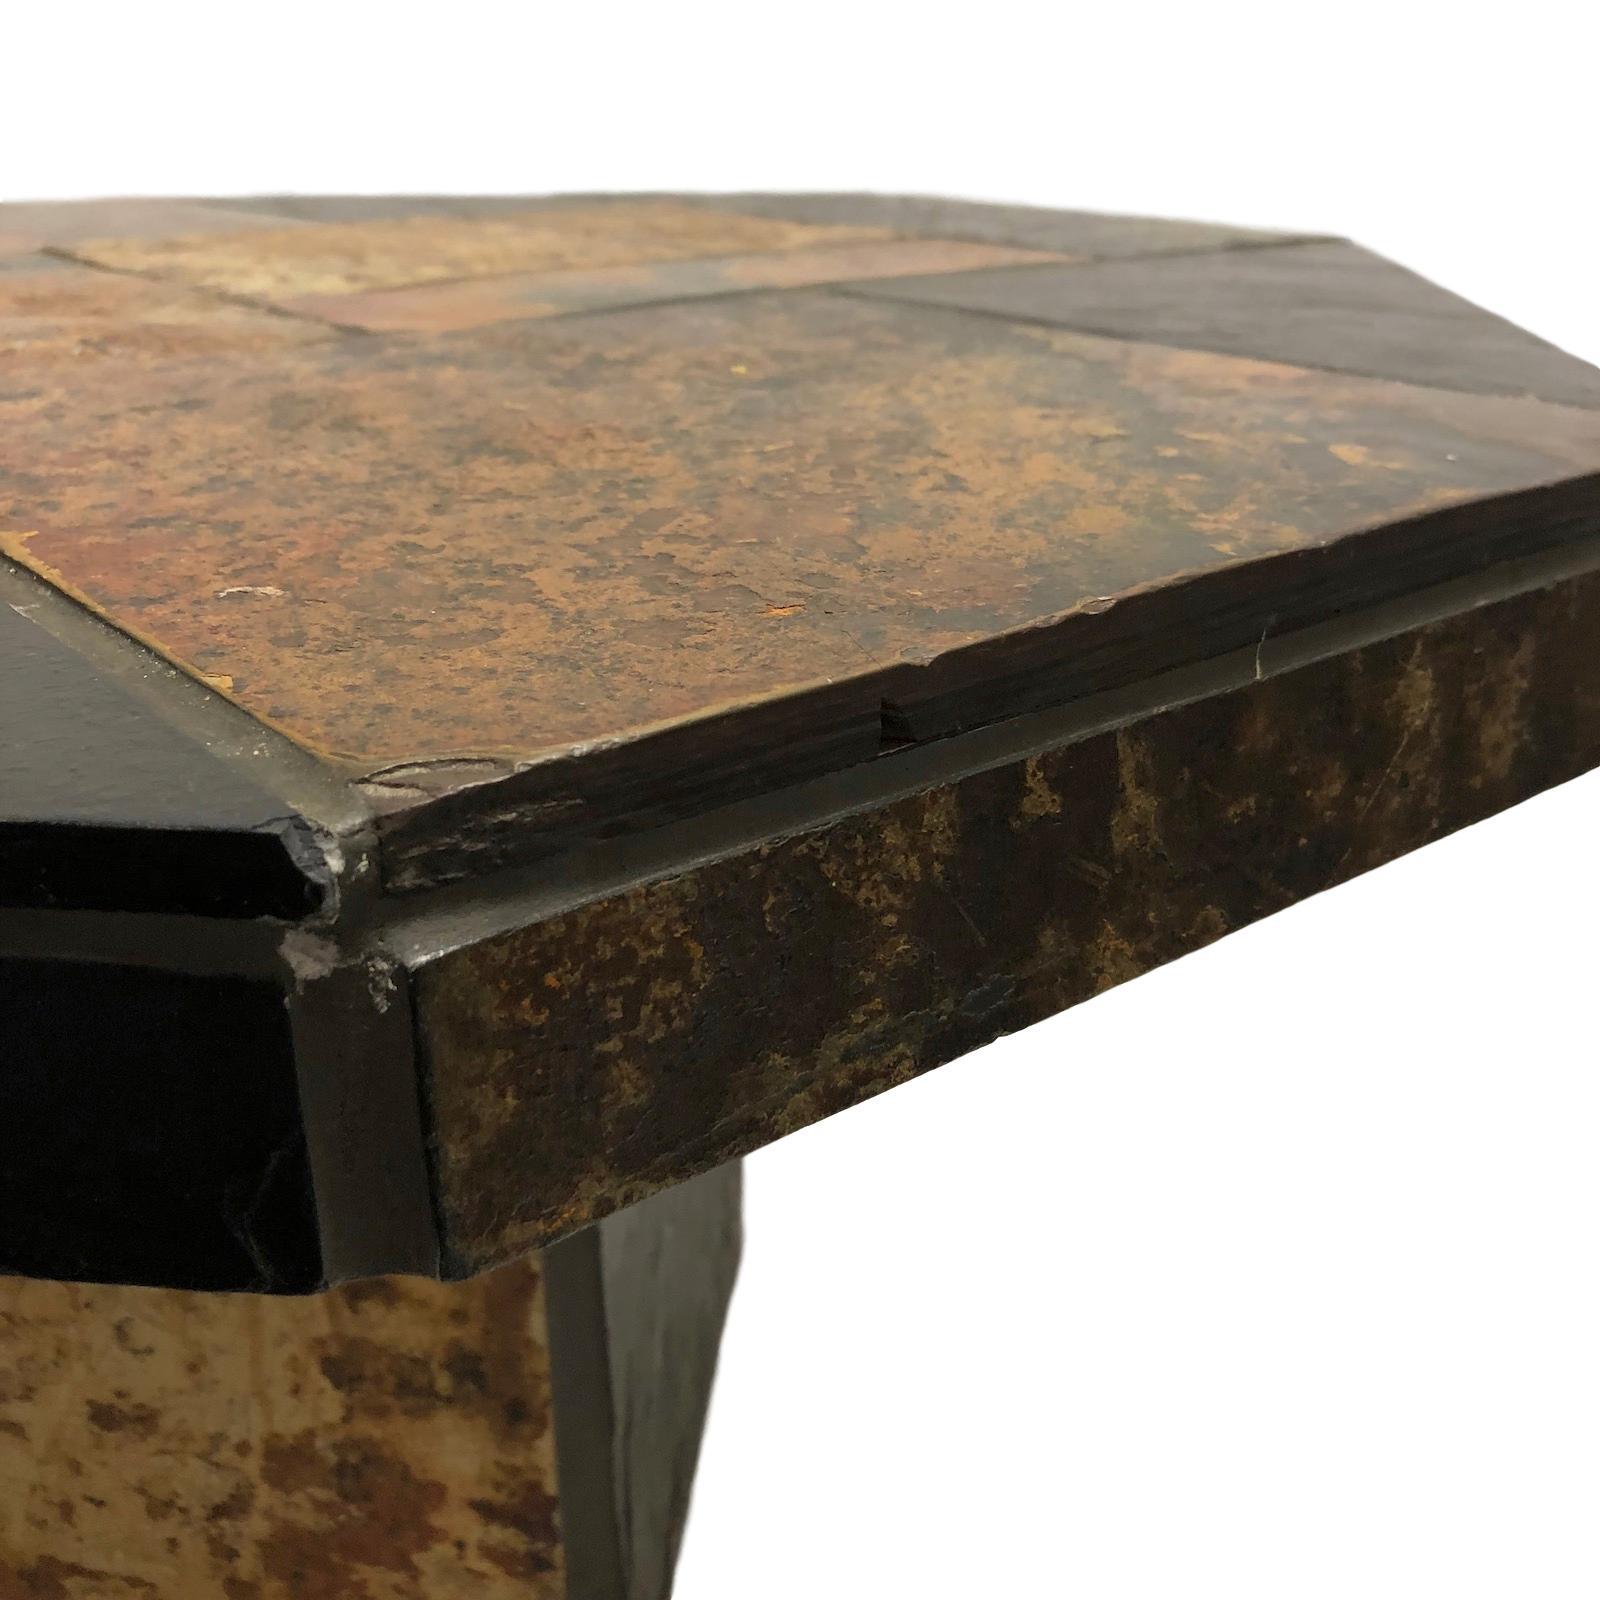 Monumental Heavy Coffee Table, Slate, Wood and Concrete, 1960s Dutch For Sale 6